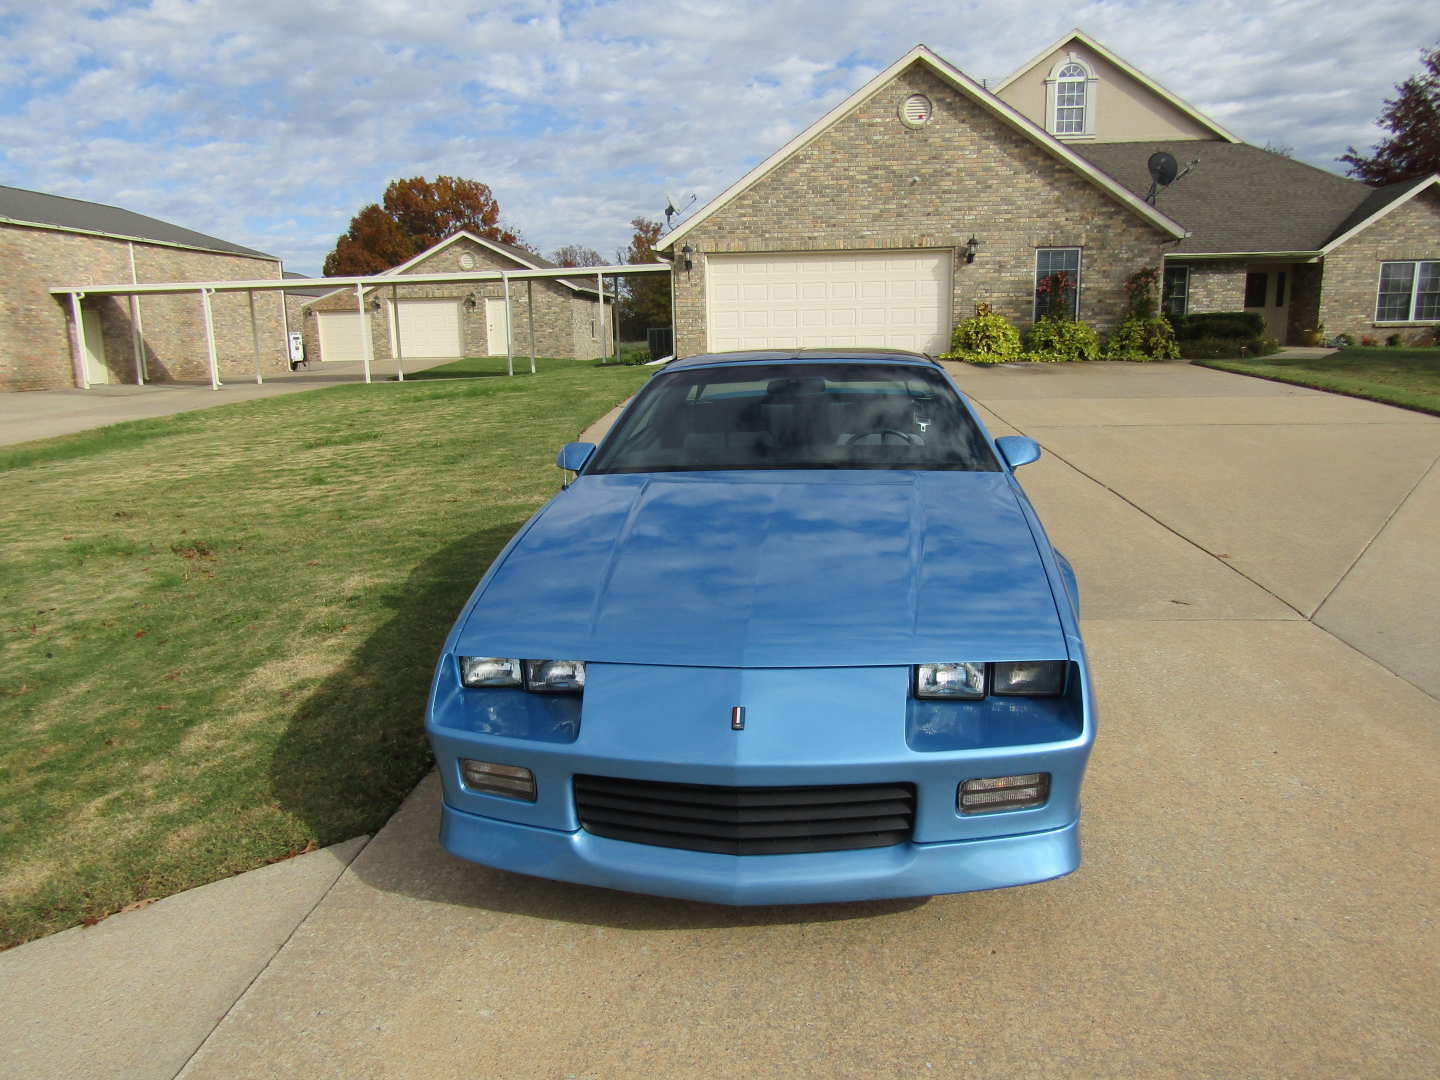 3rd Image of a 1989 CHEVROLET CAMARO RS